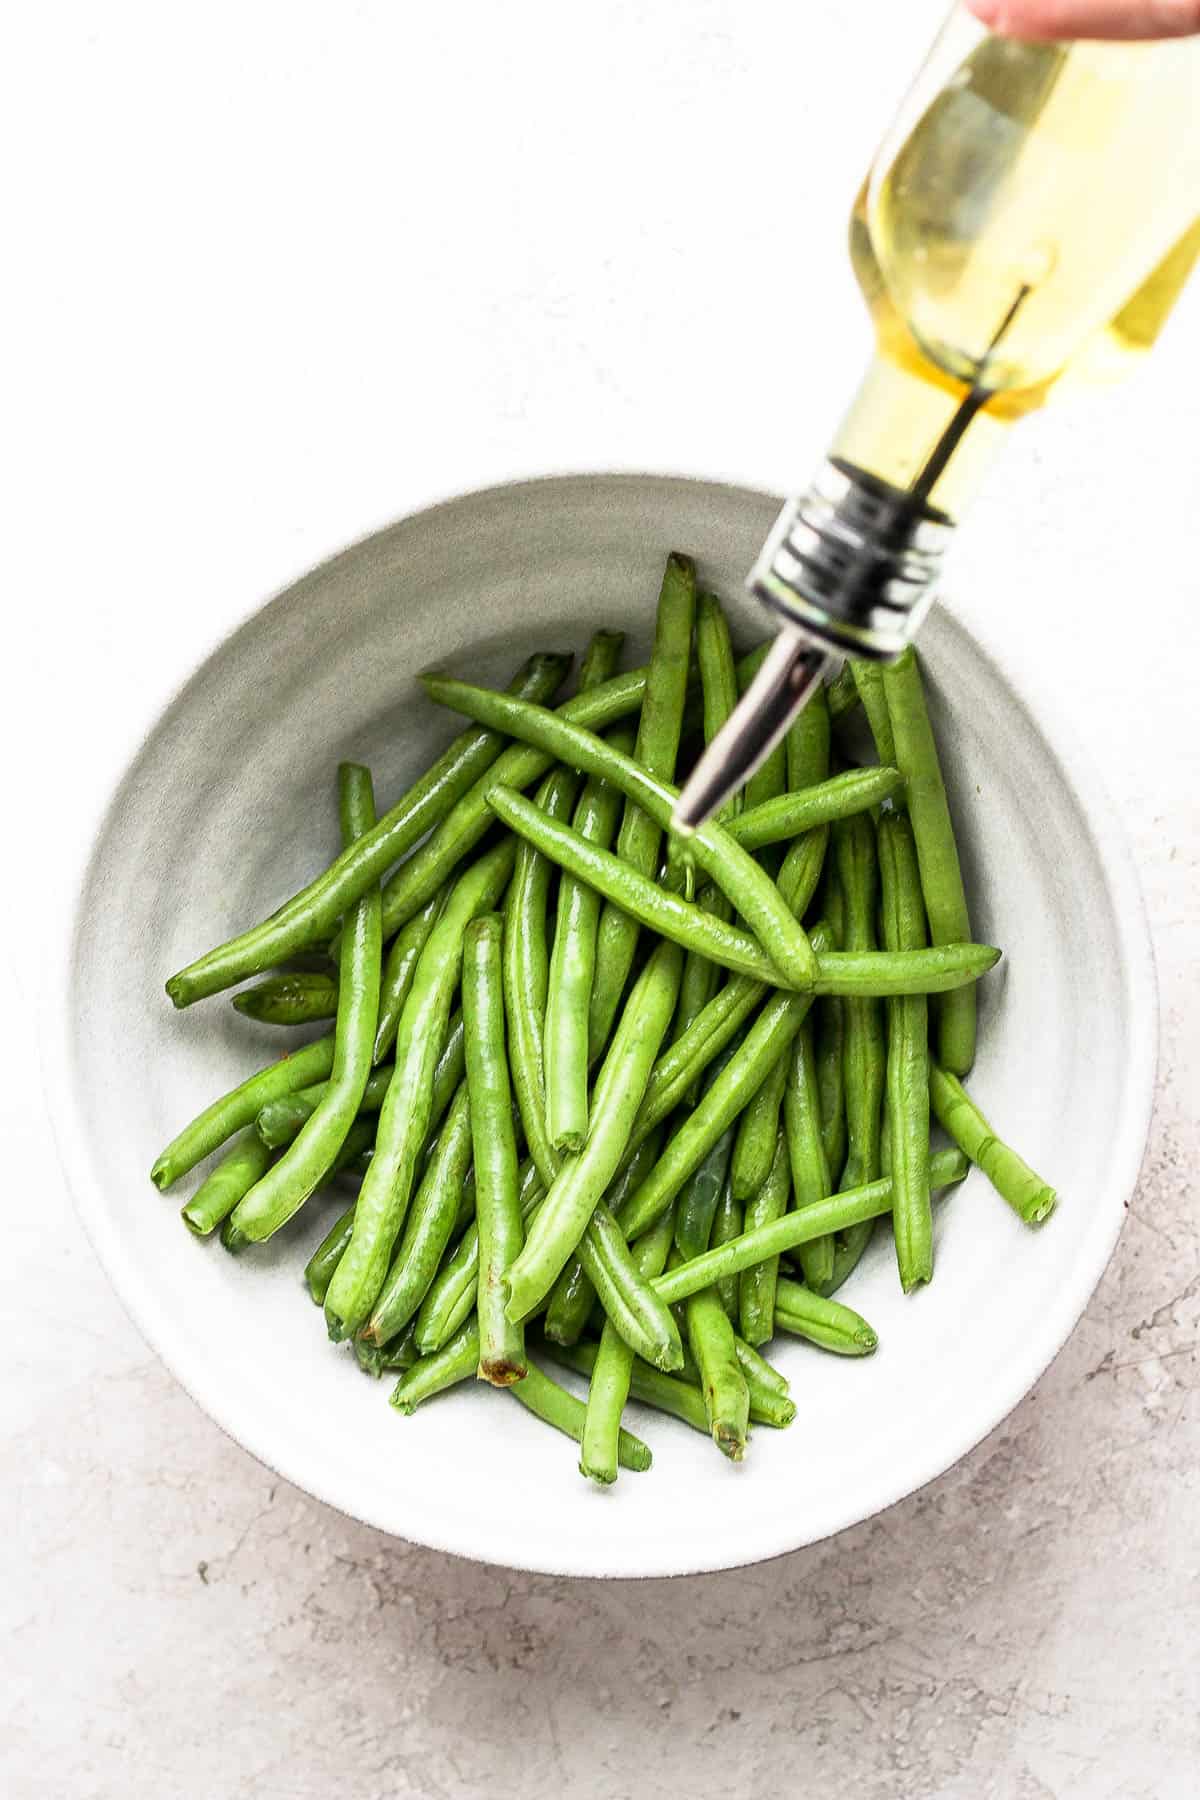 Plain green beans in a white bowl being drizzled with olive oil.